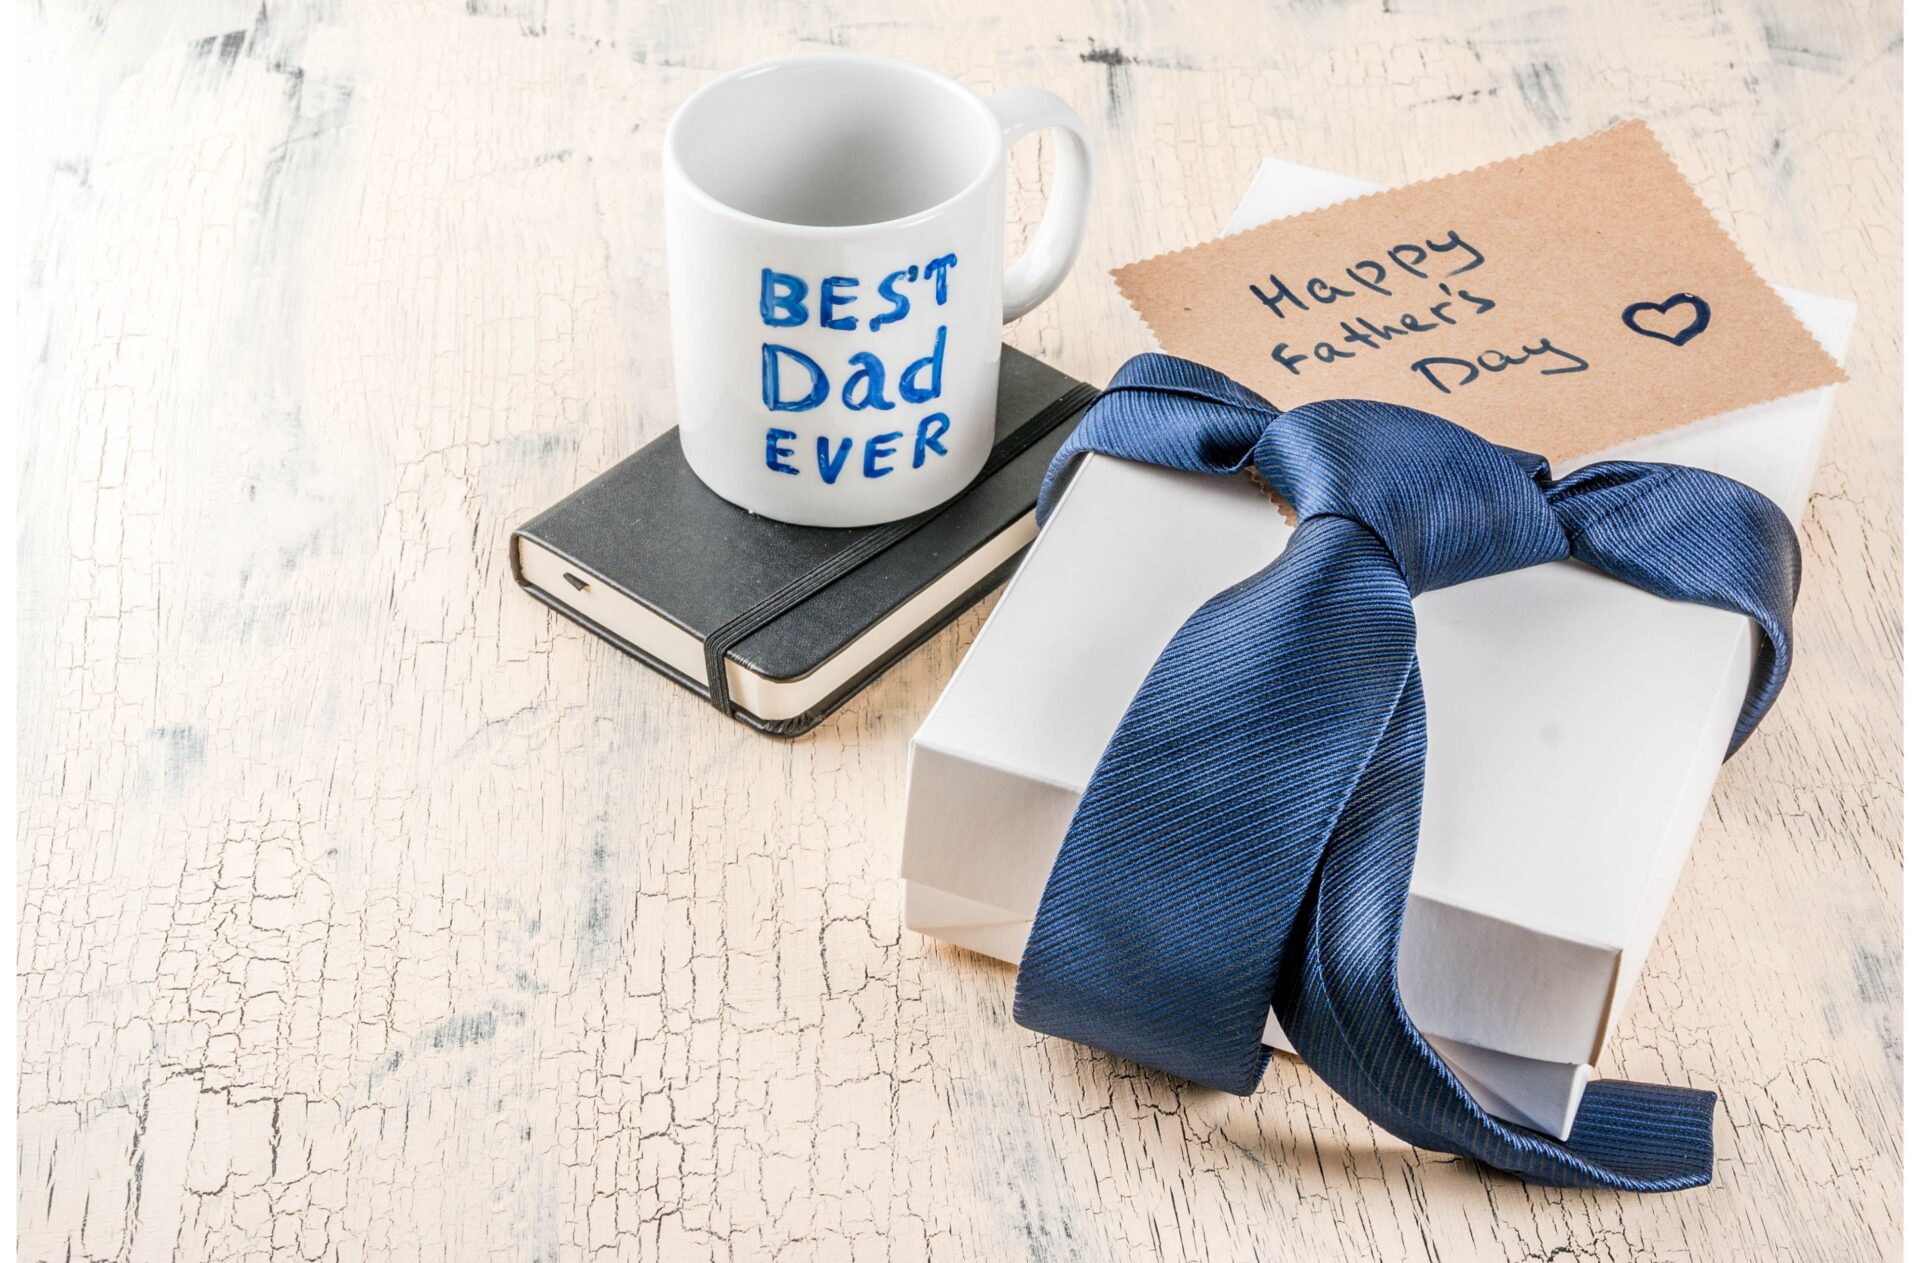 father's day crafts for toddlers and preschoolers image of gift box, wrapped in blue tie and best dad ever mug.